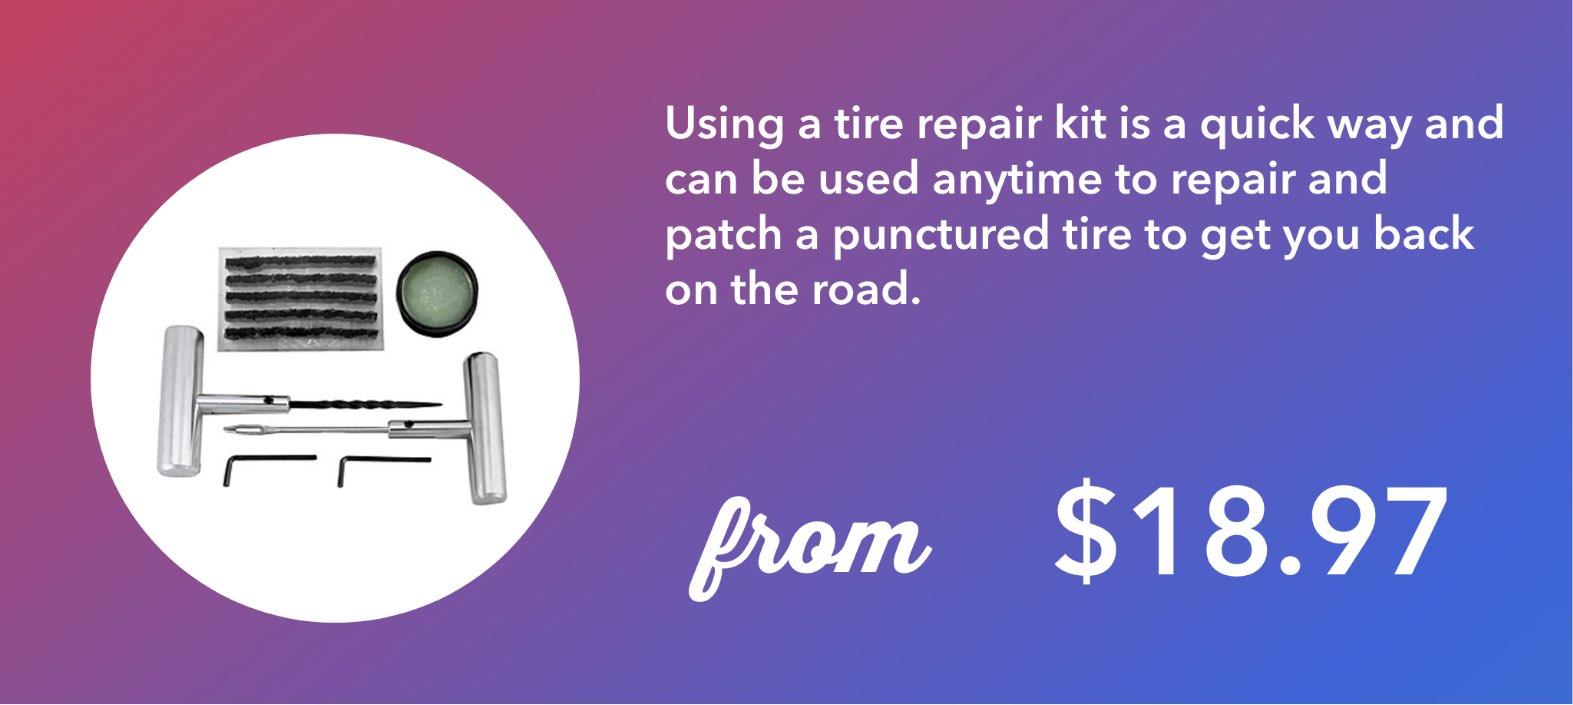 Using a tire repair kit is a quick way and can be used anytime to repair and patch a punctured tire to get you back on the road.